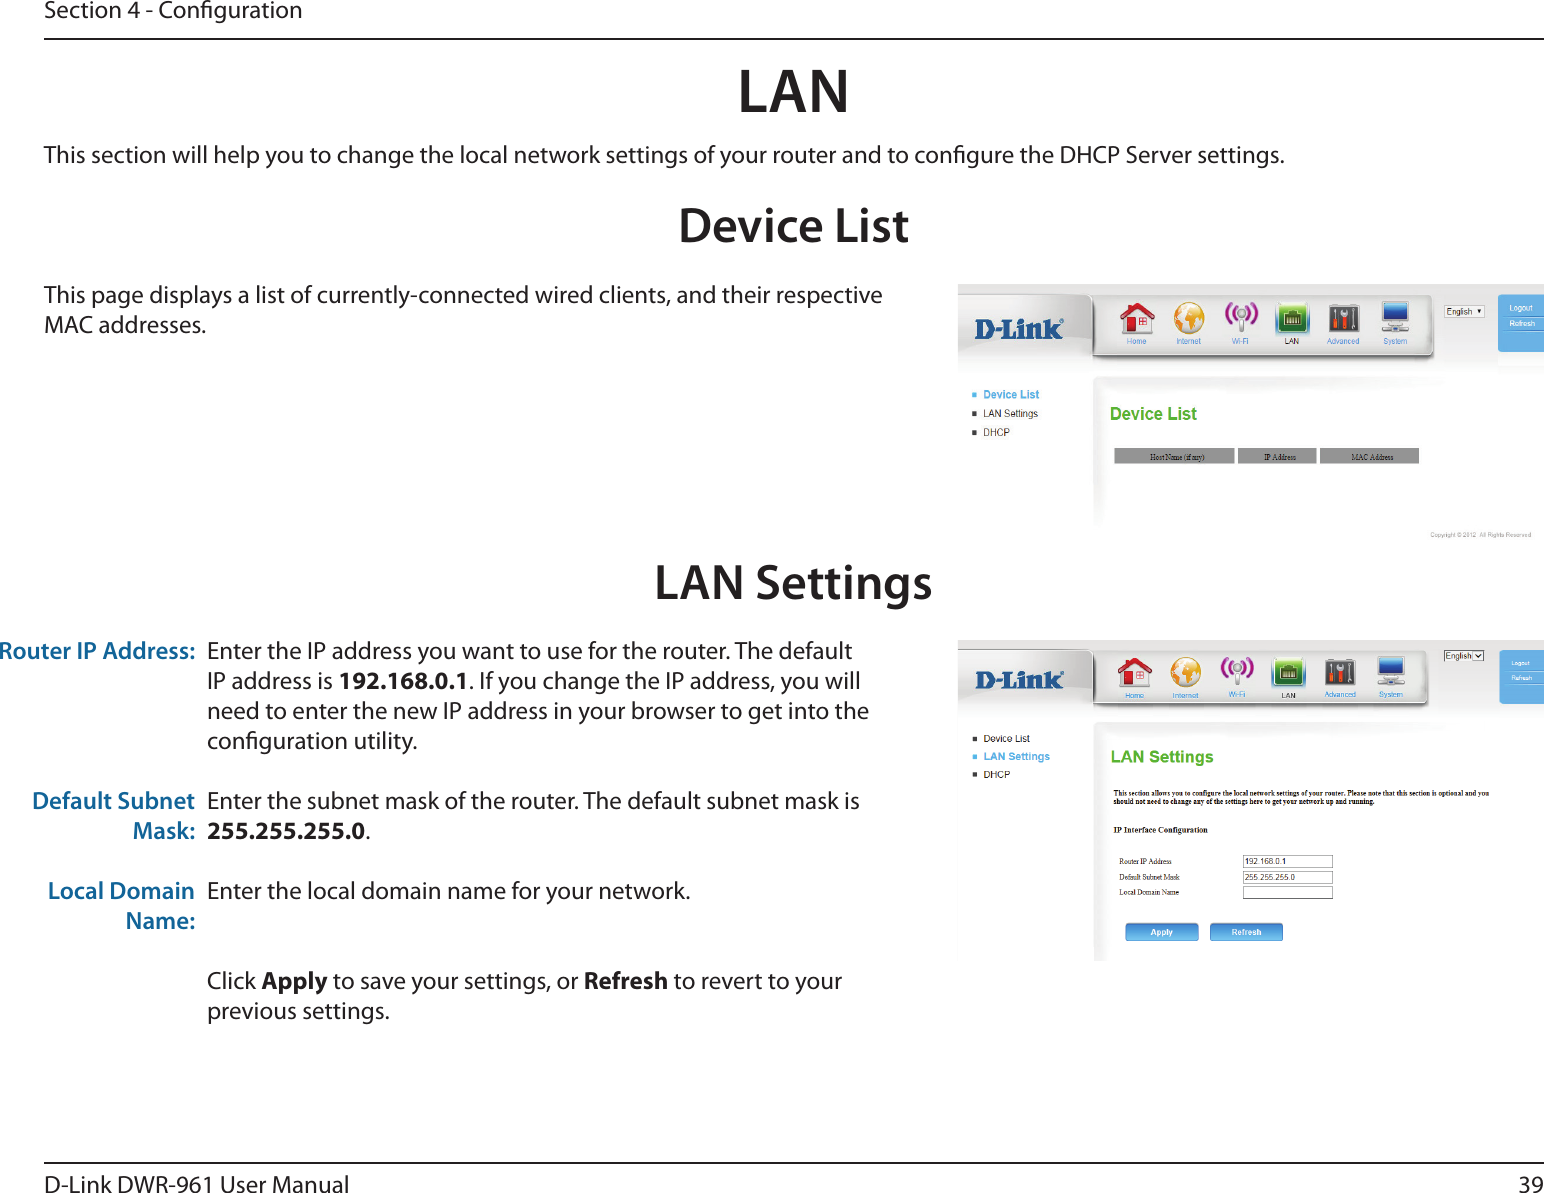 39D-Link DWR-961 User ManualSection 4 - CongurationLANDevice ListThis page displays a list of currently-connected wired clients, and their respective MAC addresses.LAN SettingsEnter the IP address you want to use for the router. The default IP address is 192.168.0.1. If you change the IP address, you will need to enter the new IP address in your browser to get into the conguration utility.Enter the subnet mask of the router. The default subnet mask is 255.255.255.0.Enter the local domain name for your network.Click Apply to save your settings, or Refresh to revert to your previous settings.Router IP Address:Default Subnet Mask:Local Domain Name:This section will help you to change the local network settings of your router and to congure the DHCP Server settings.